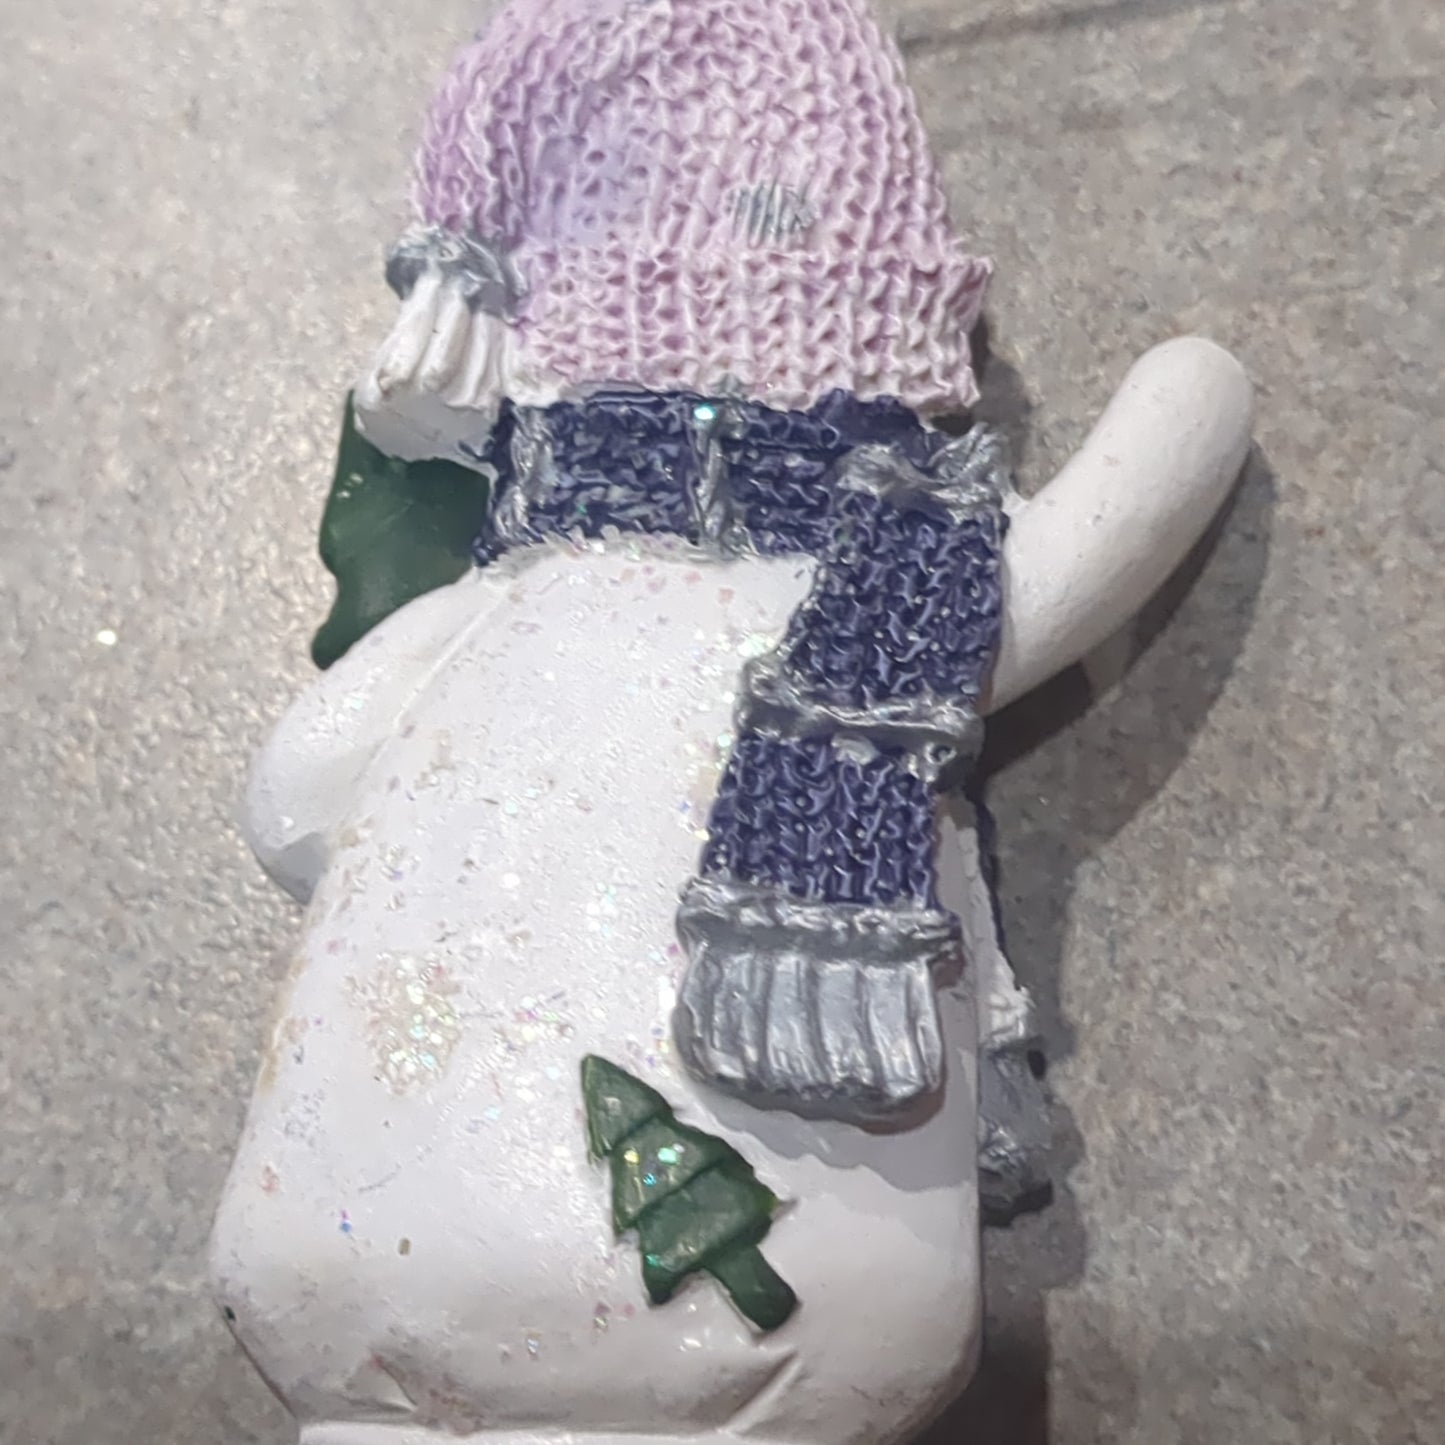 Polycrylic snowman ornament with a tree lilac and purple